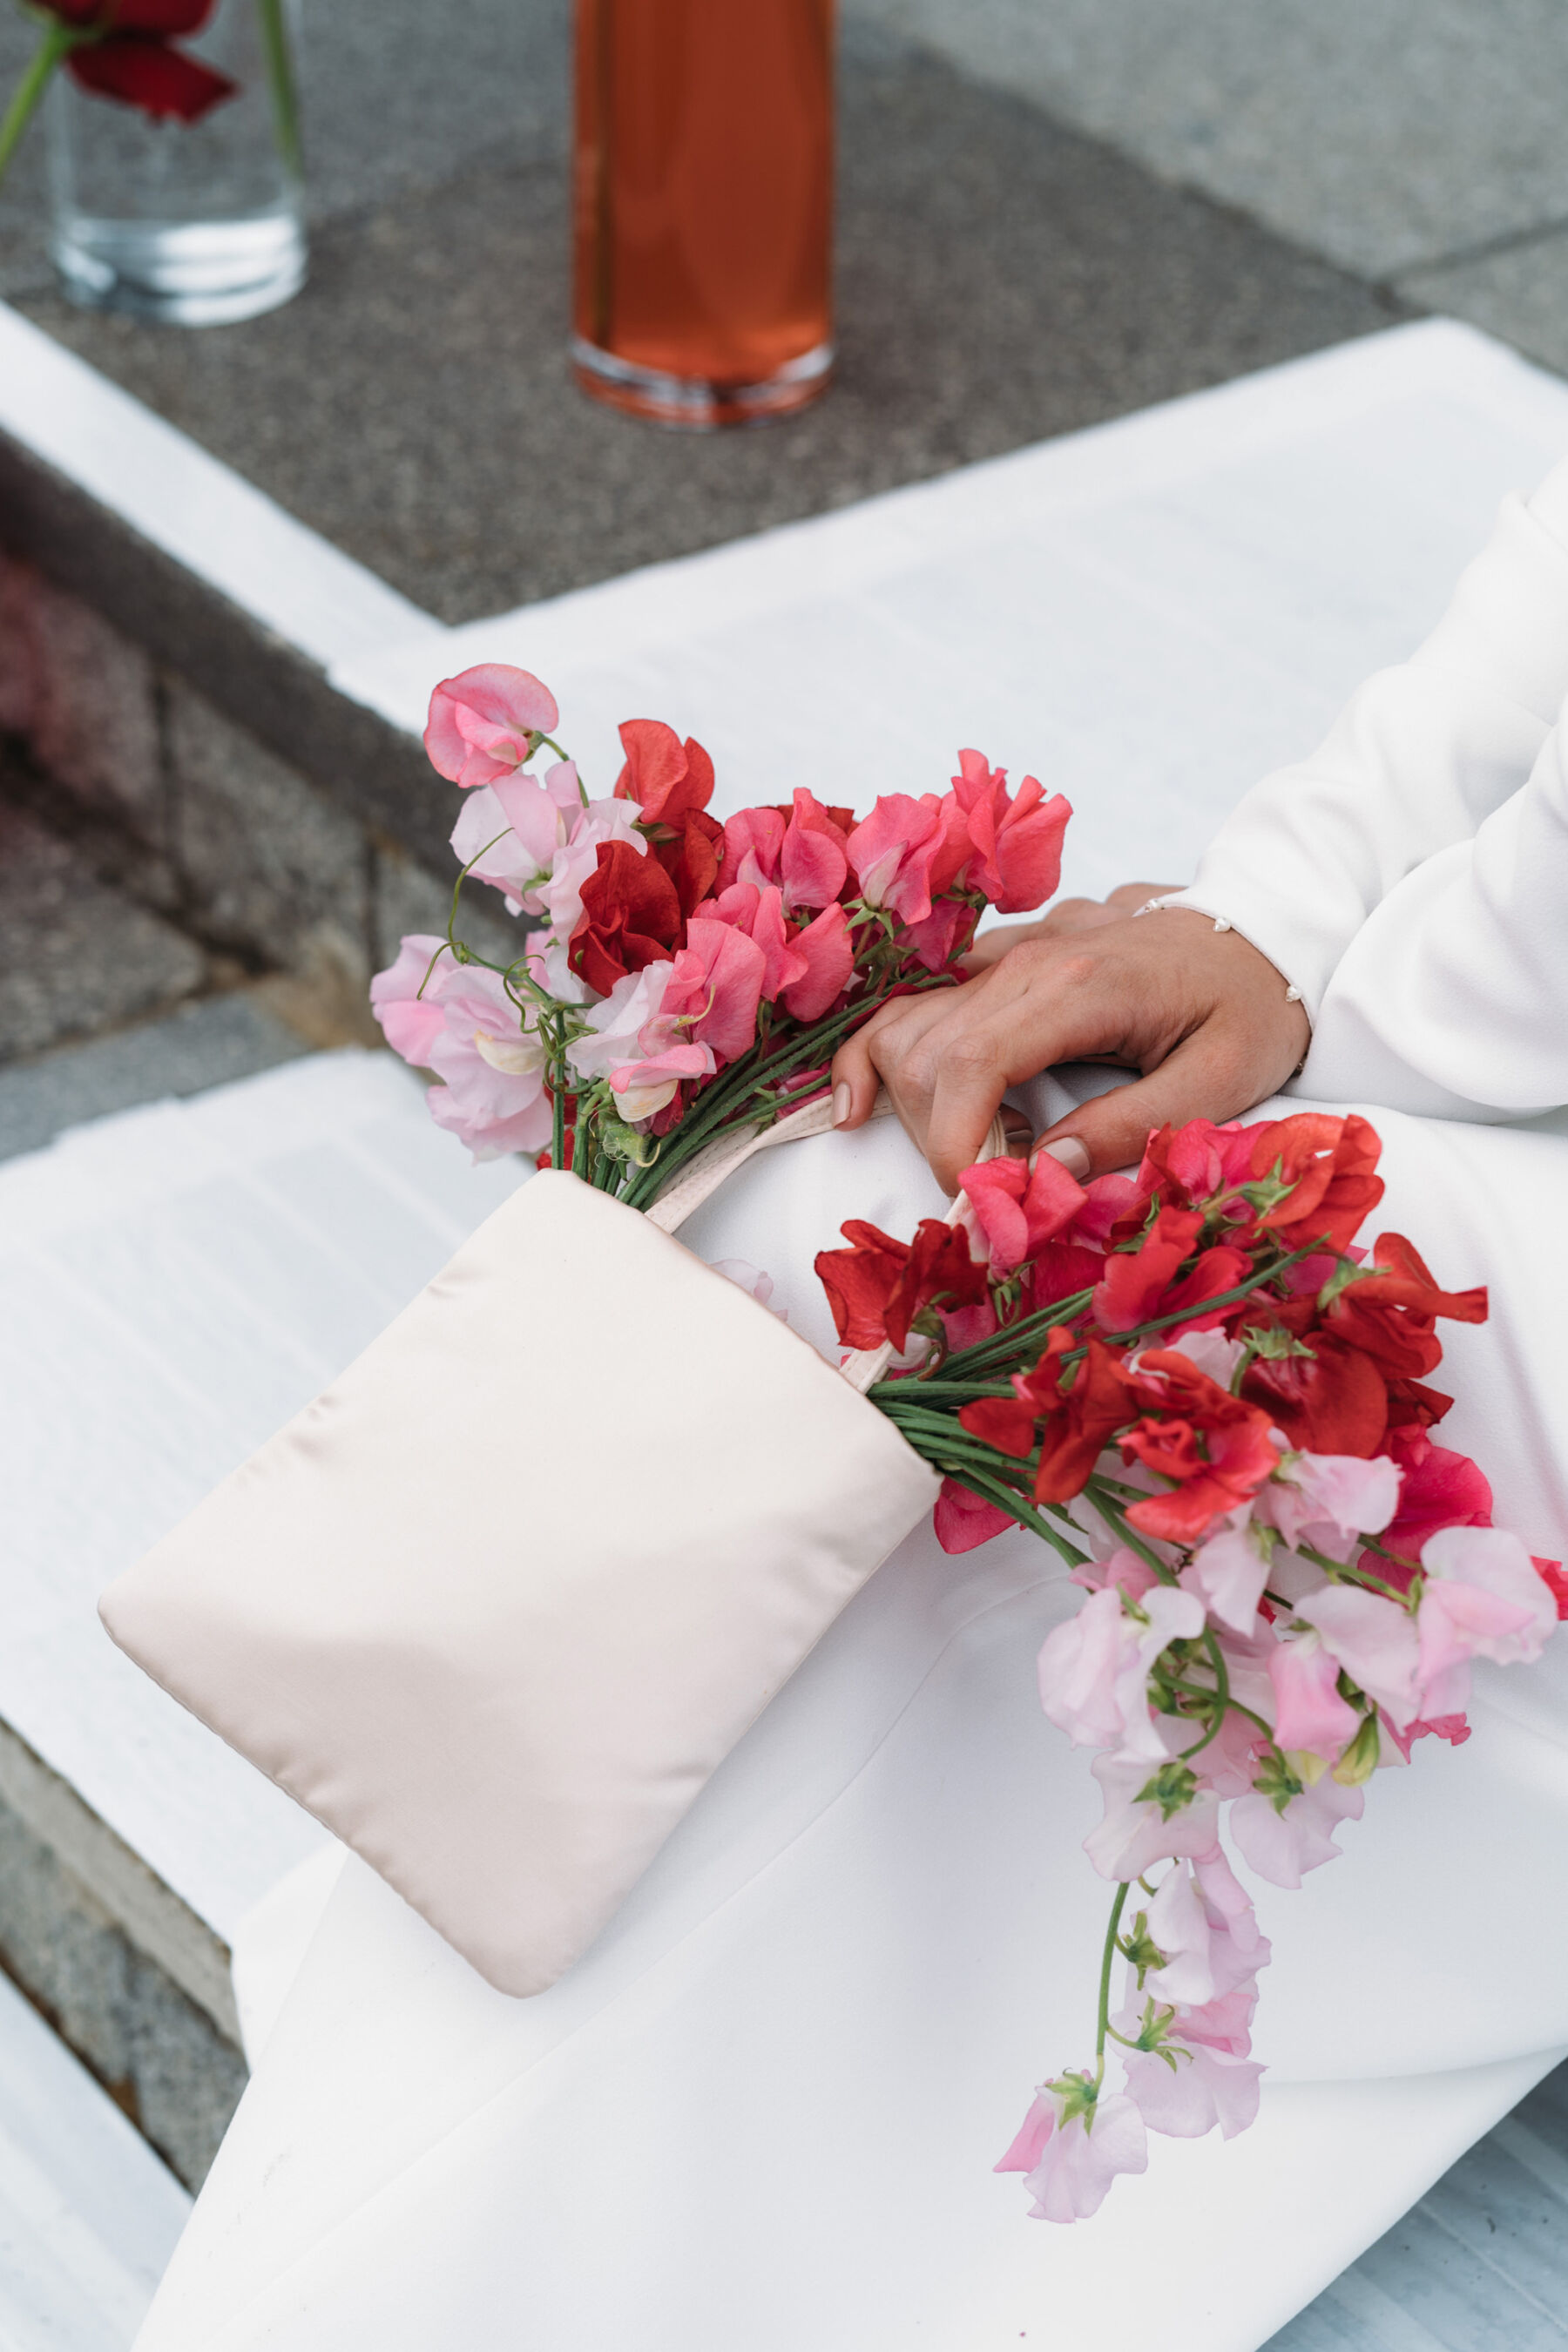 Cute bridal clutch bag spilling with sweet pea flowers. Joanna Bongard Photography.